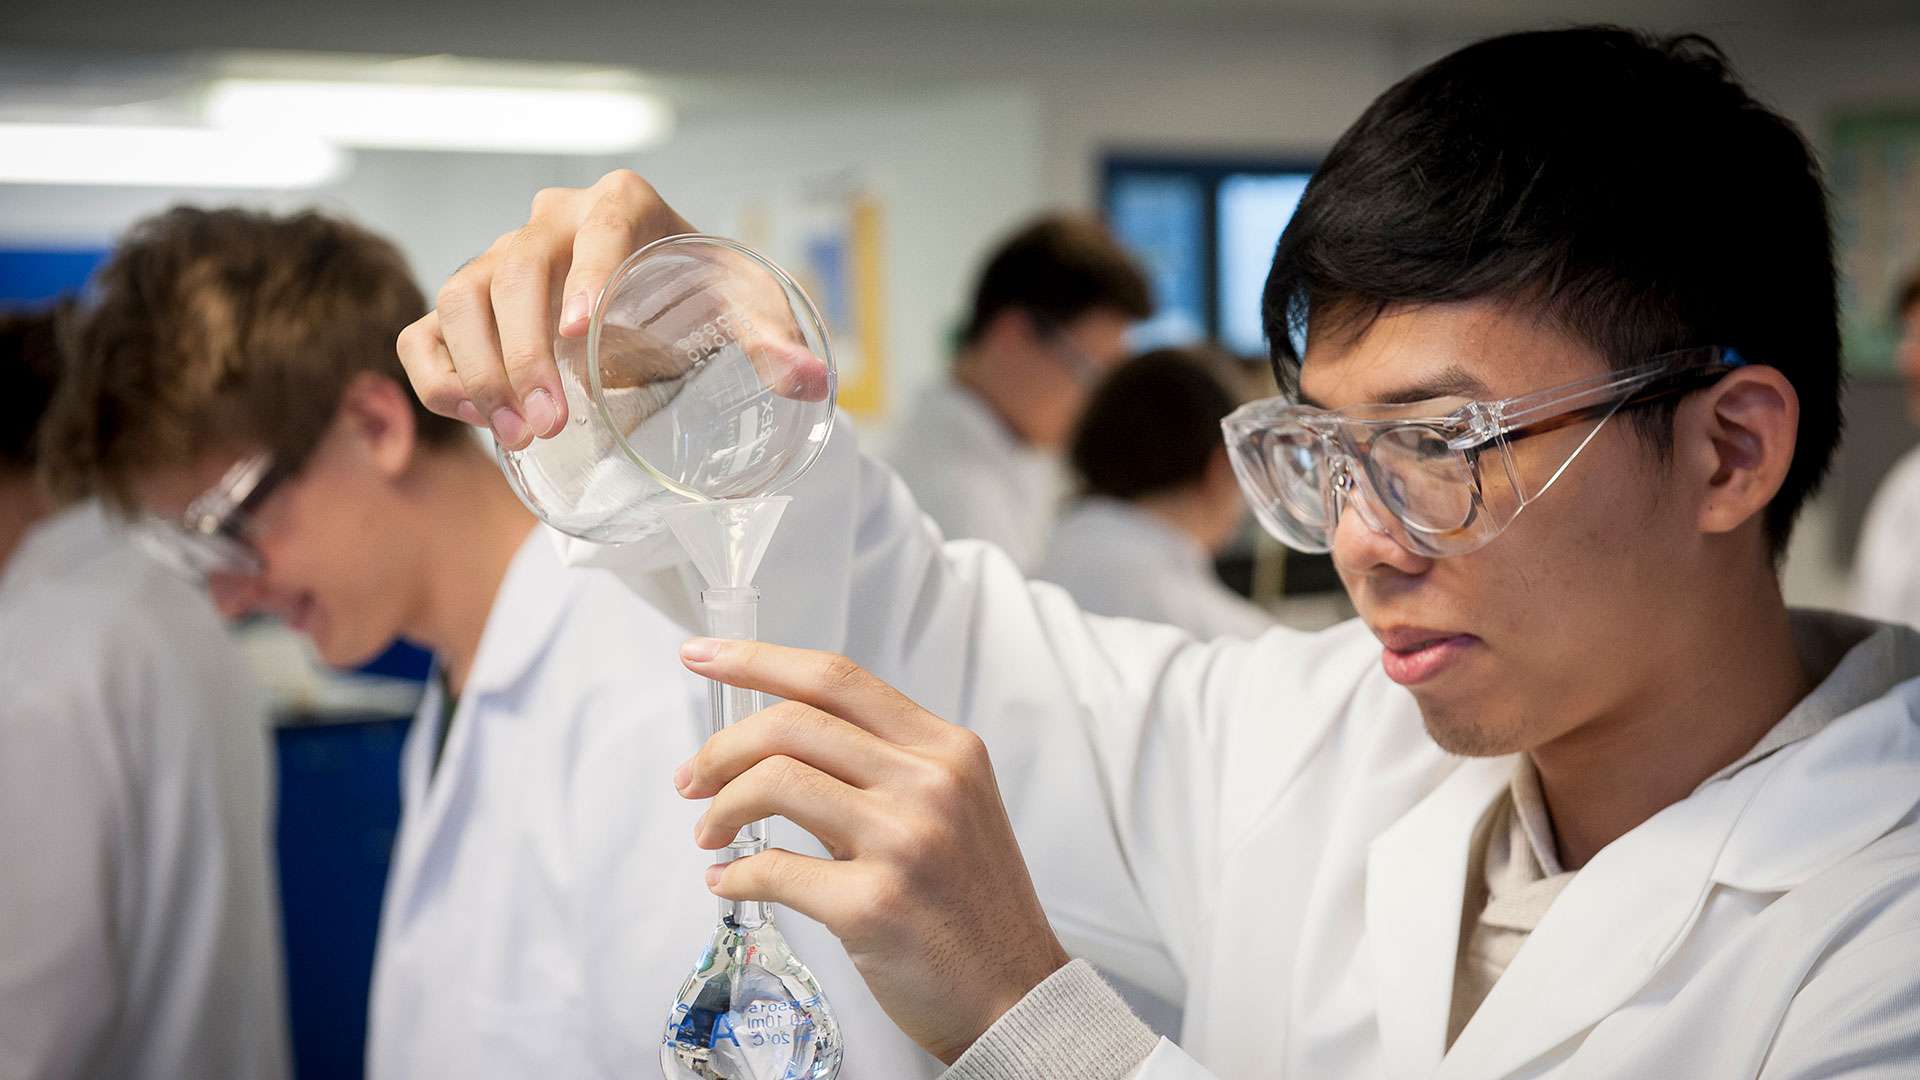 5 reasons to study chemistry at Bath